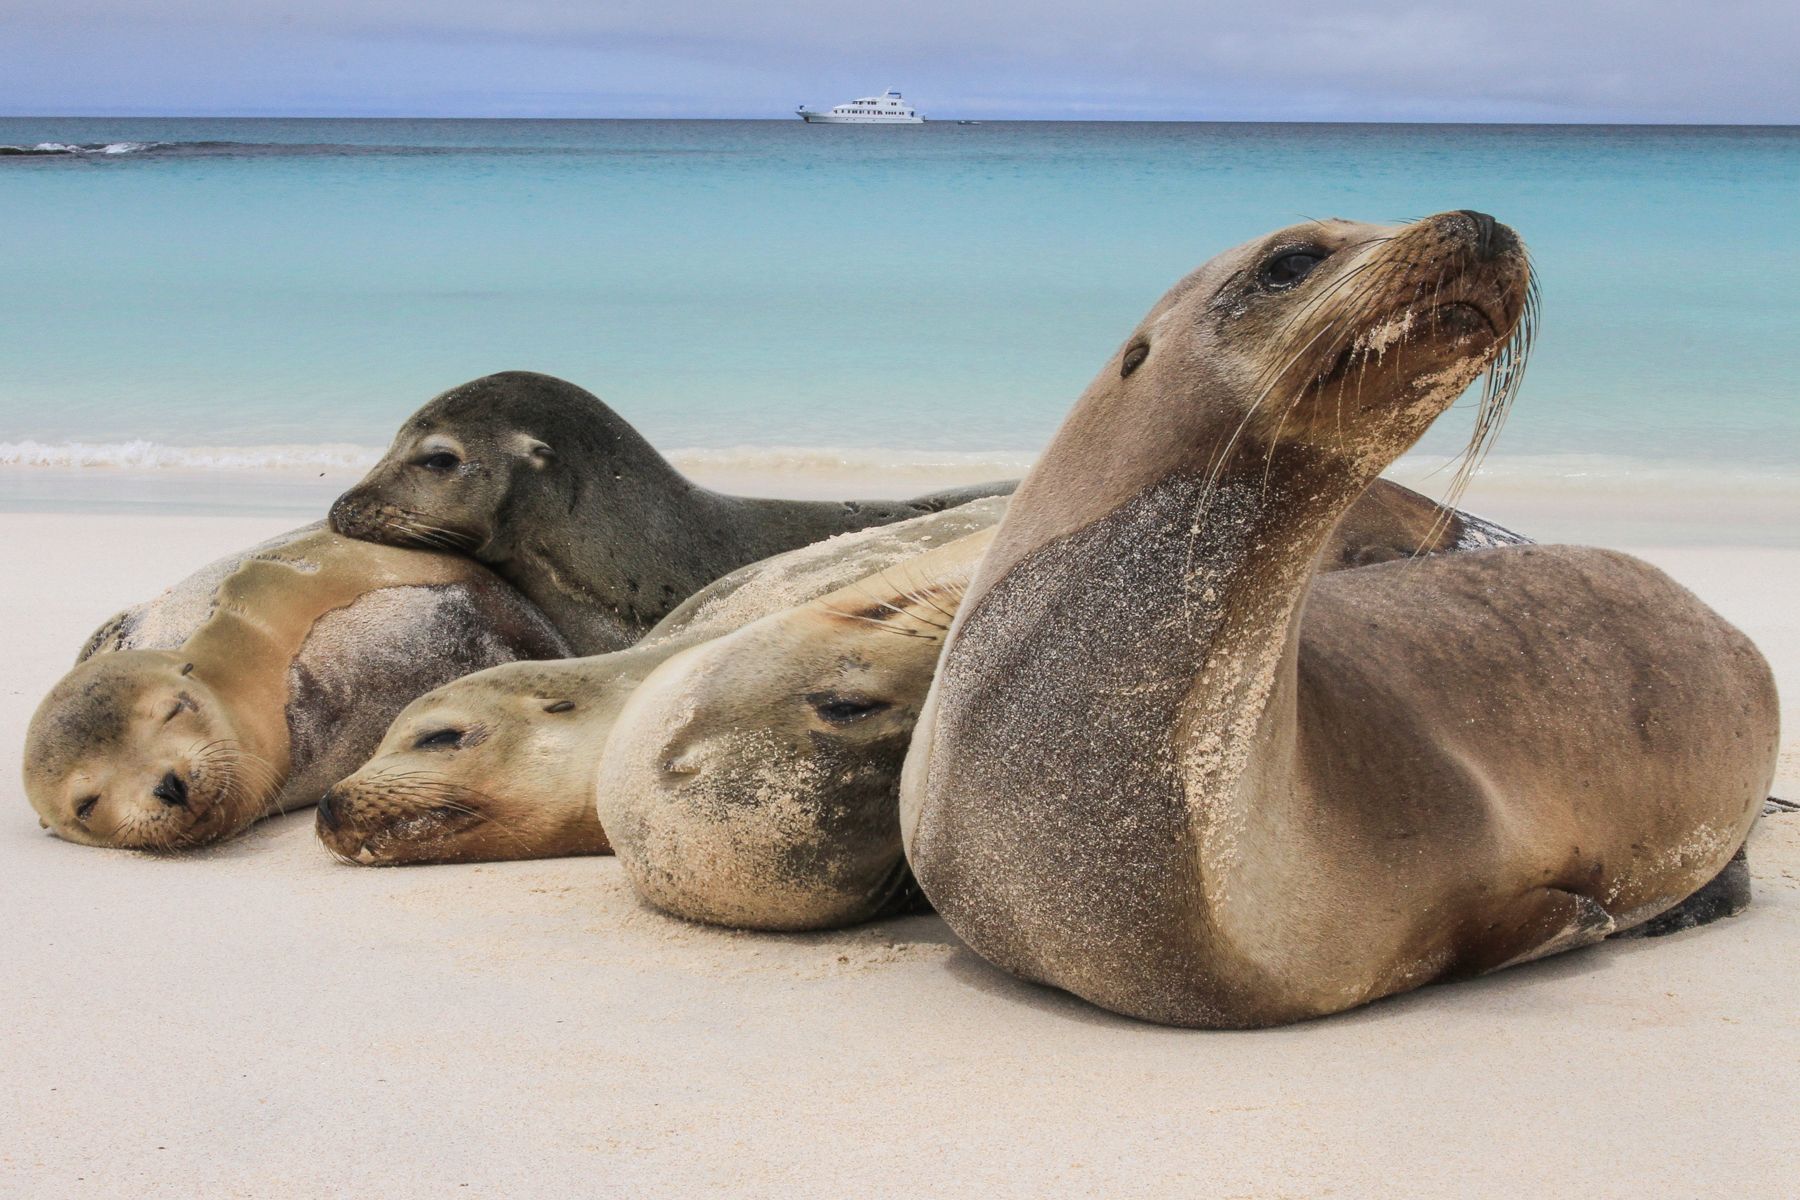 Often they loll in groups to get warm; Galapagos waters are cool